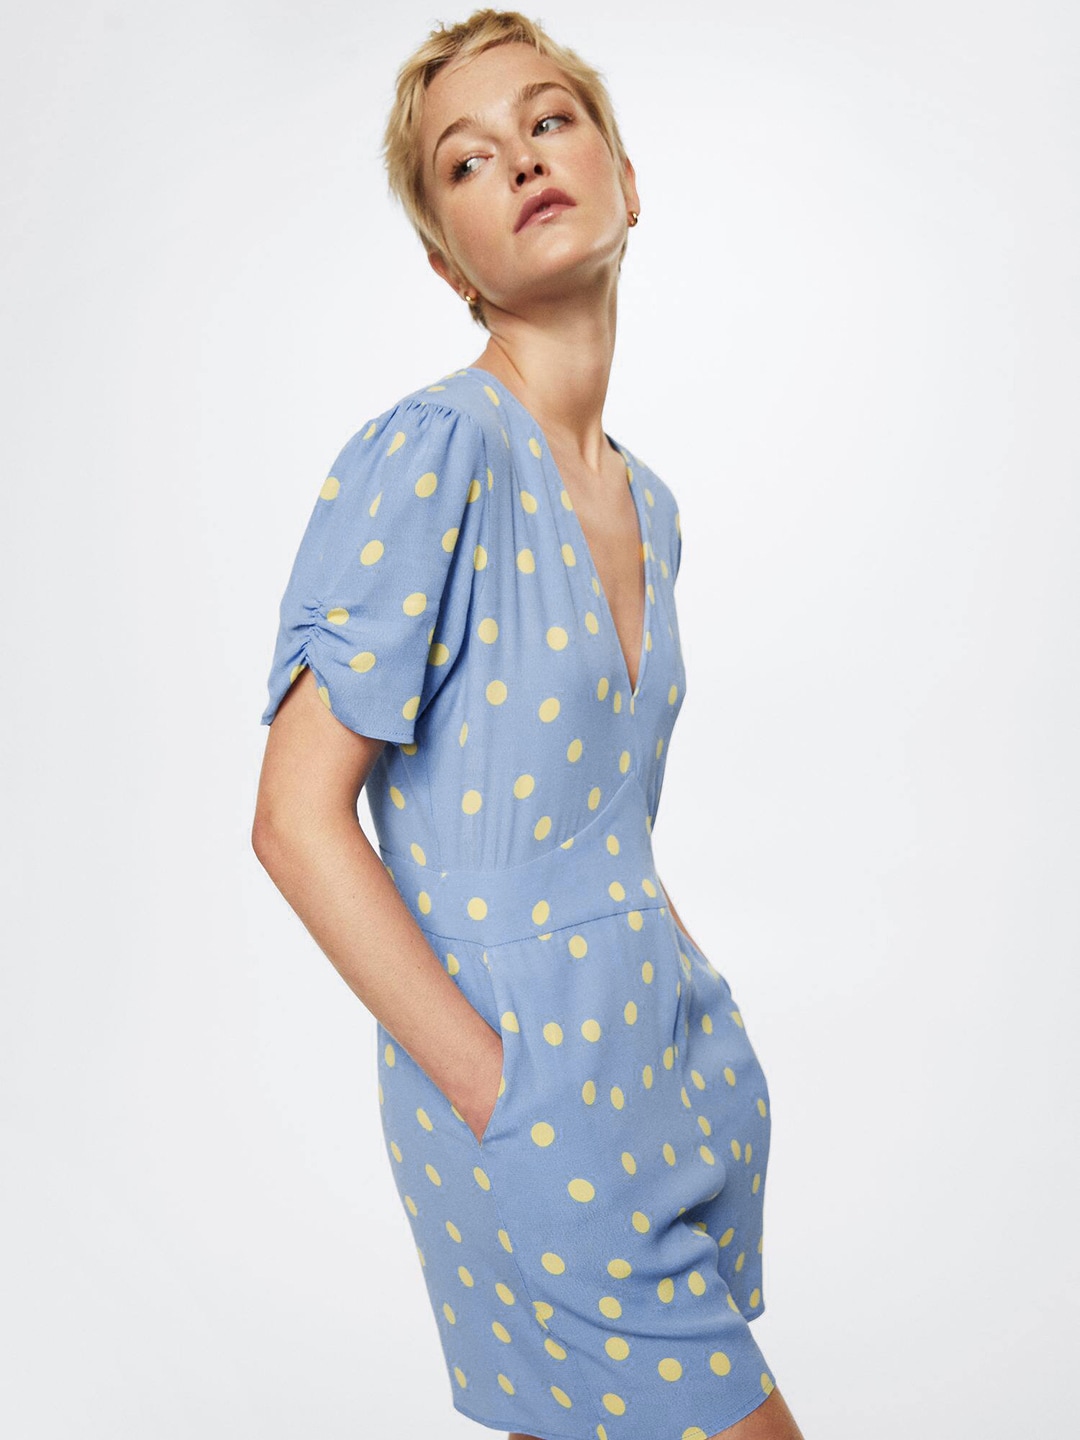 MANGO Blue & Yellow Polka Dots Print Playsuit Price in India